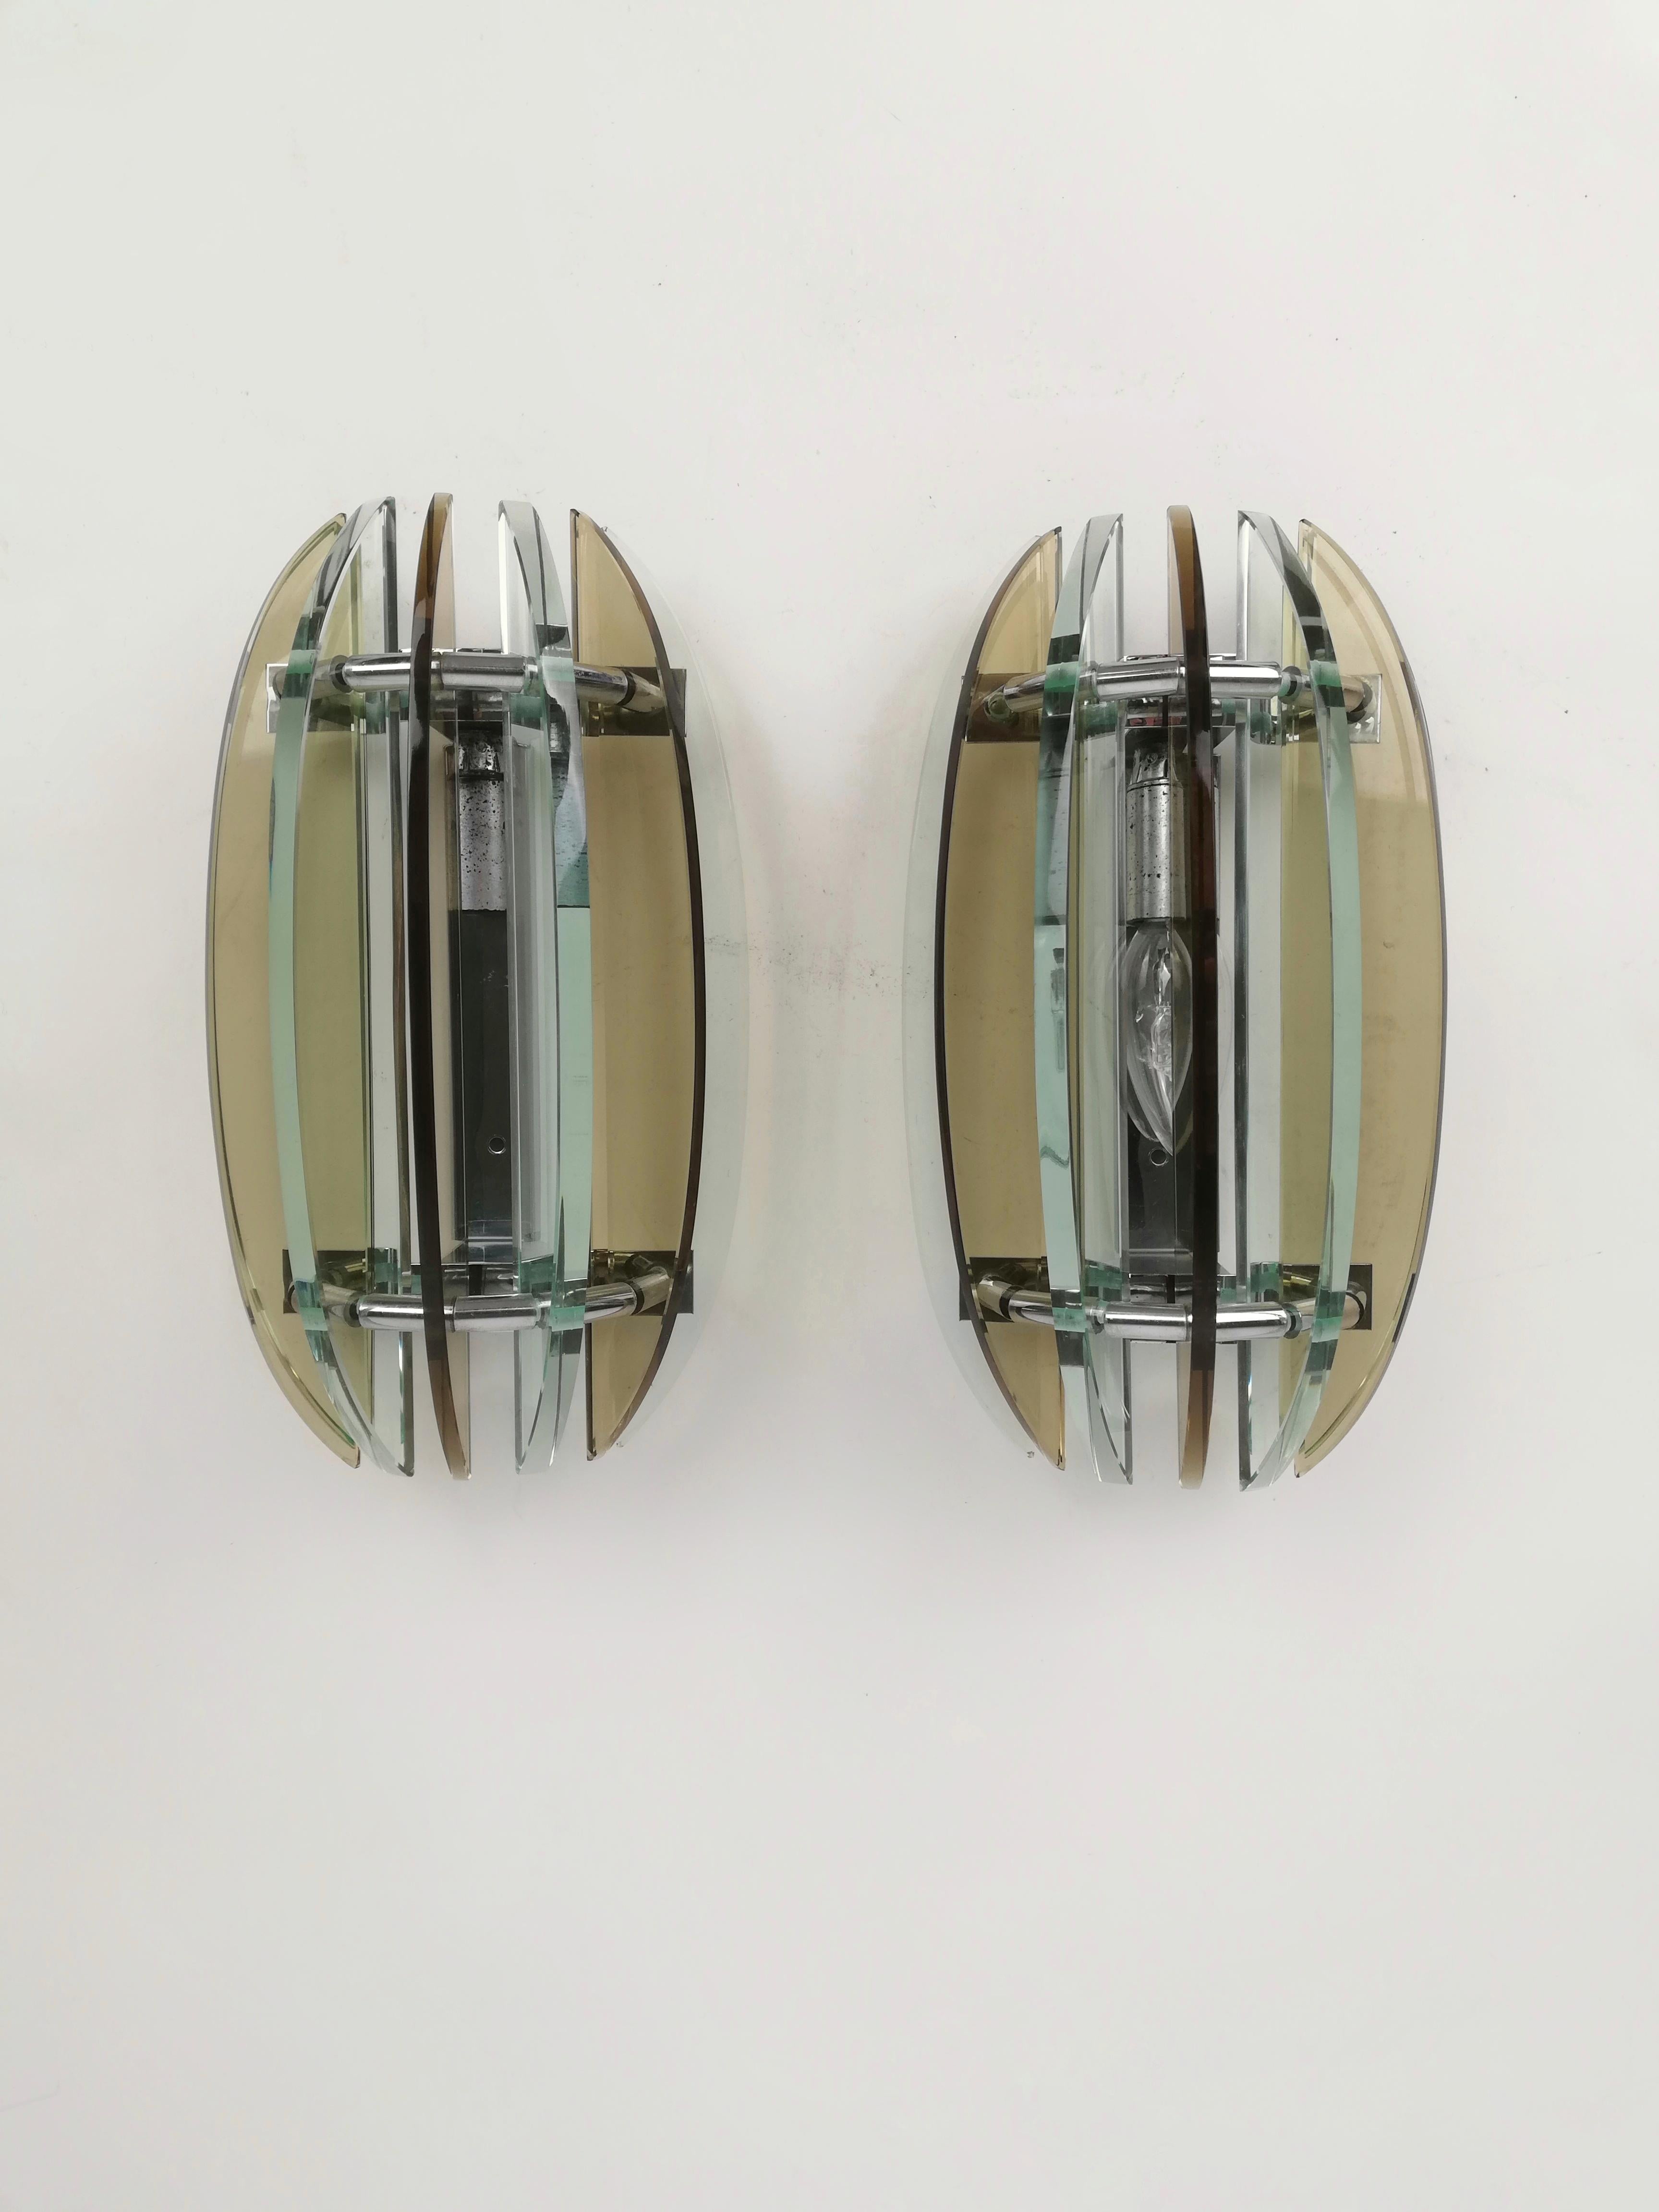 A pair of wall sconces dating from the 60s and 70s and produced by the VECA company, a famous Italian company known for glass production such as Fontana Arte durnig the 20th century.
Glass segments are fixed to a chromed metal structure of 2